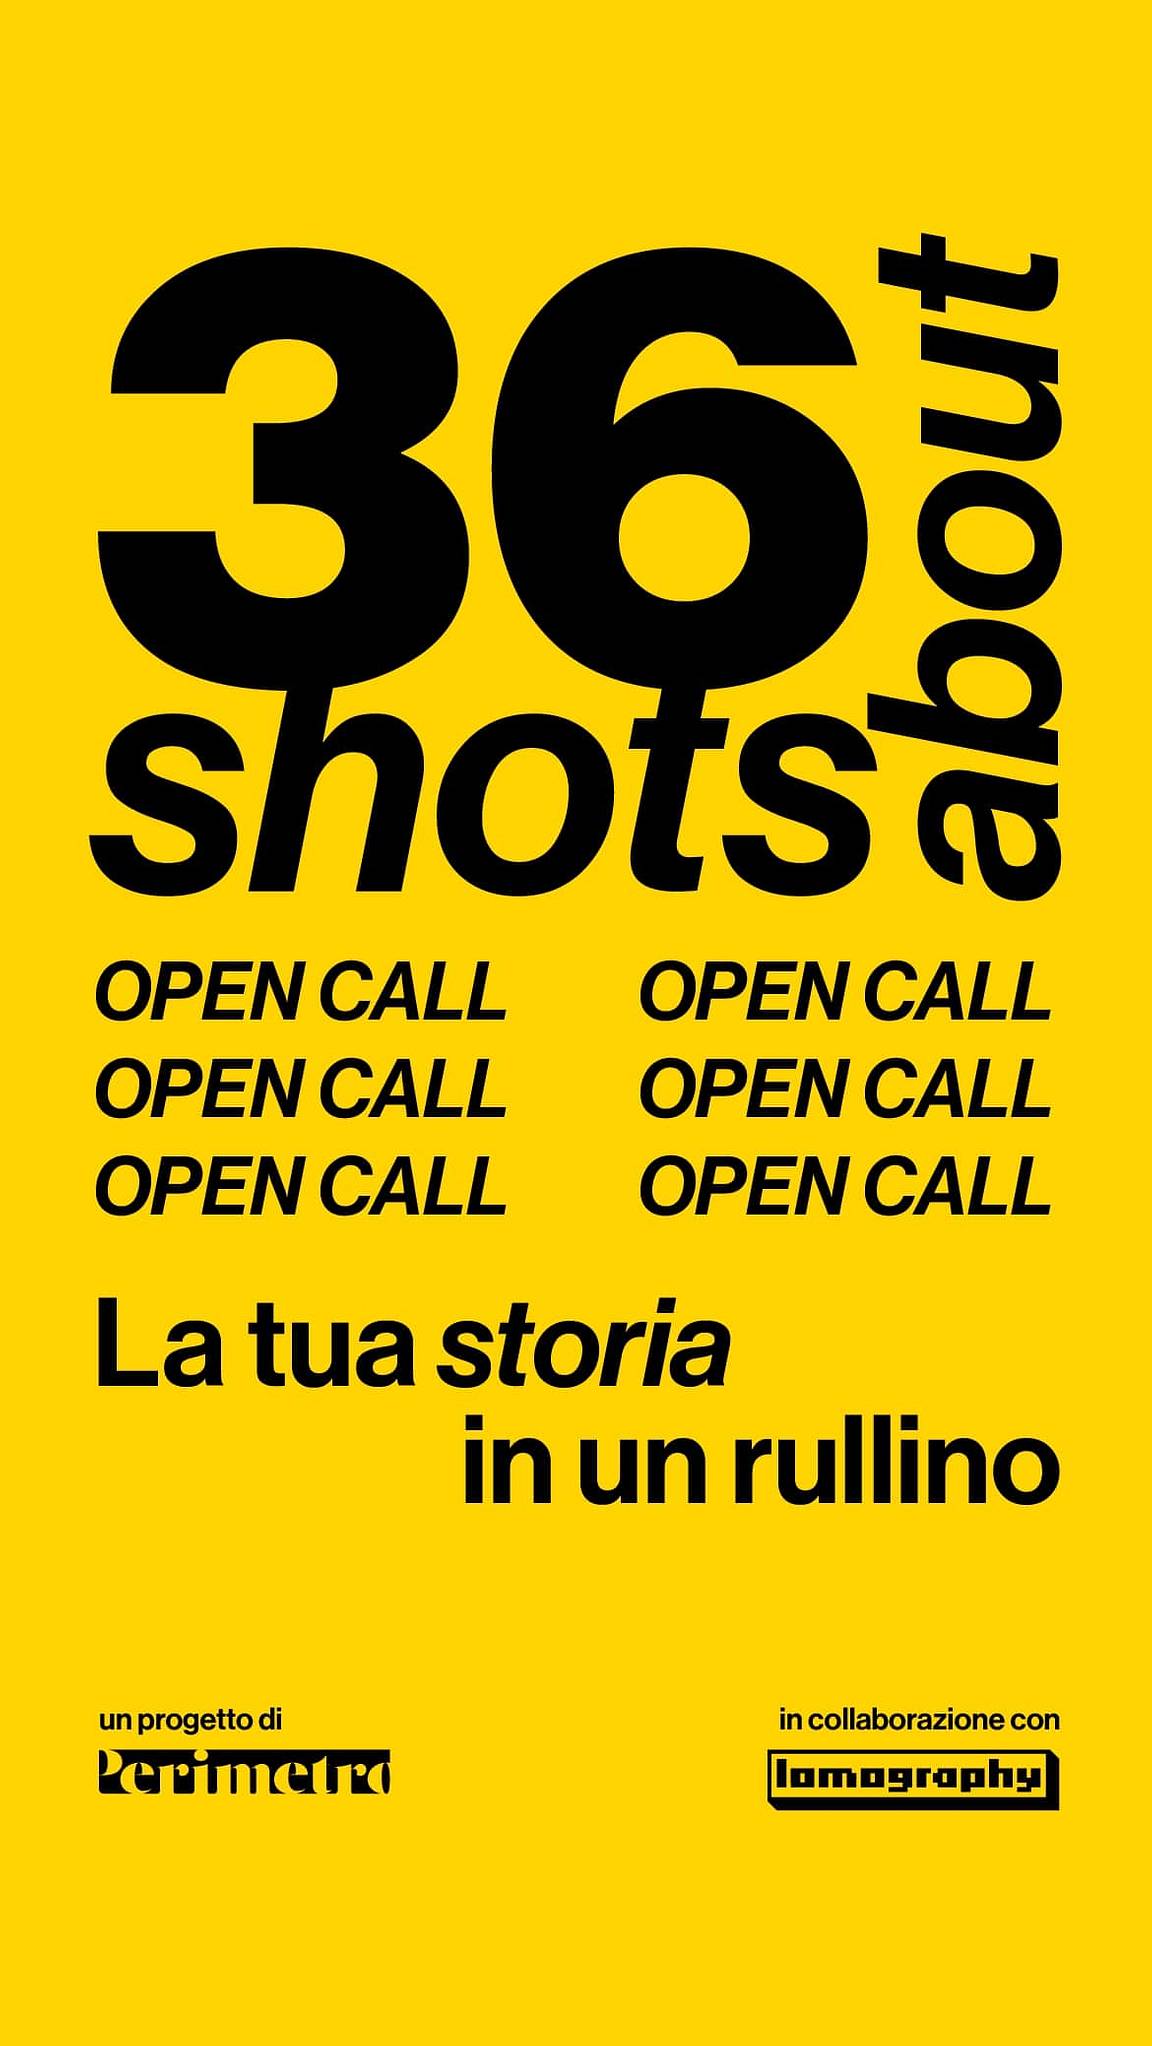 36 Shots About – Your Story on Film: Free Open Call in Collaboration with Perimetro